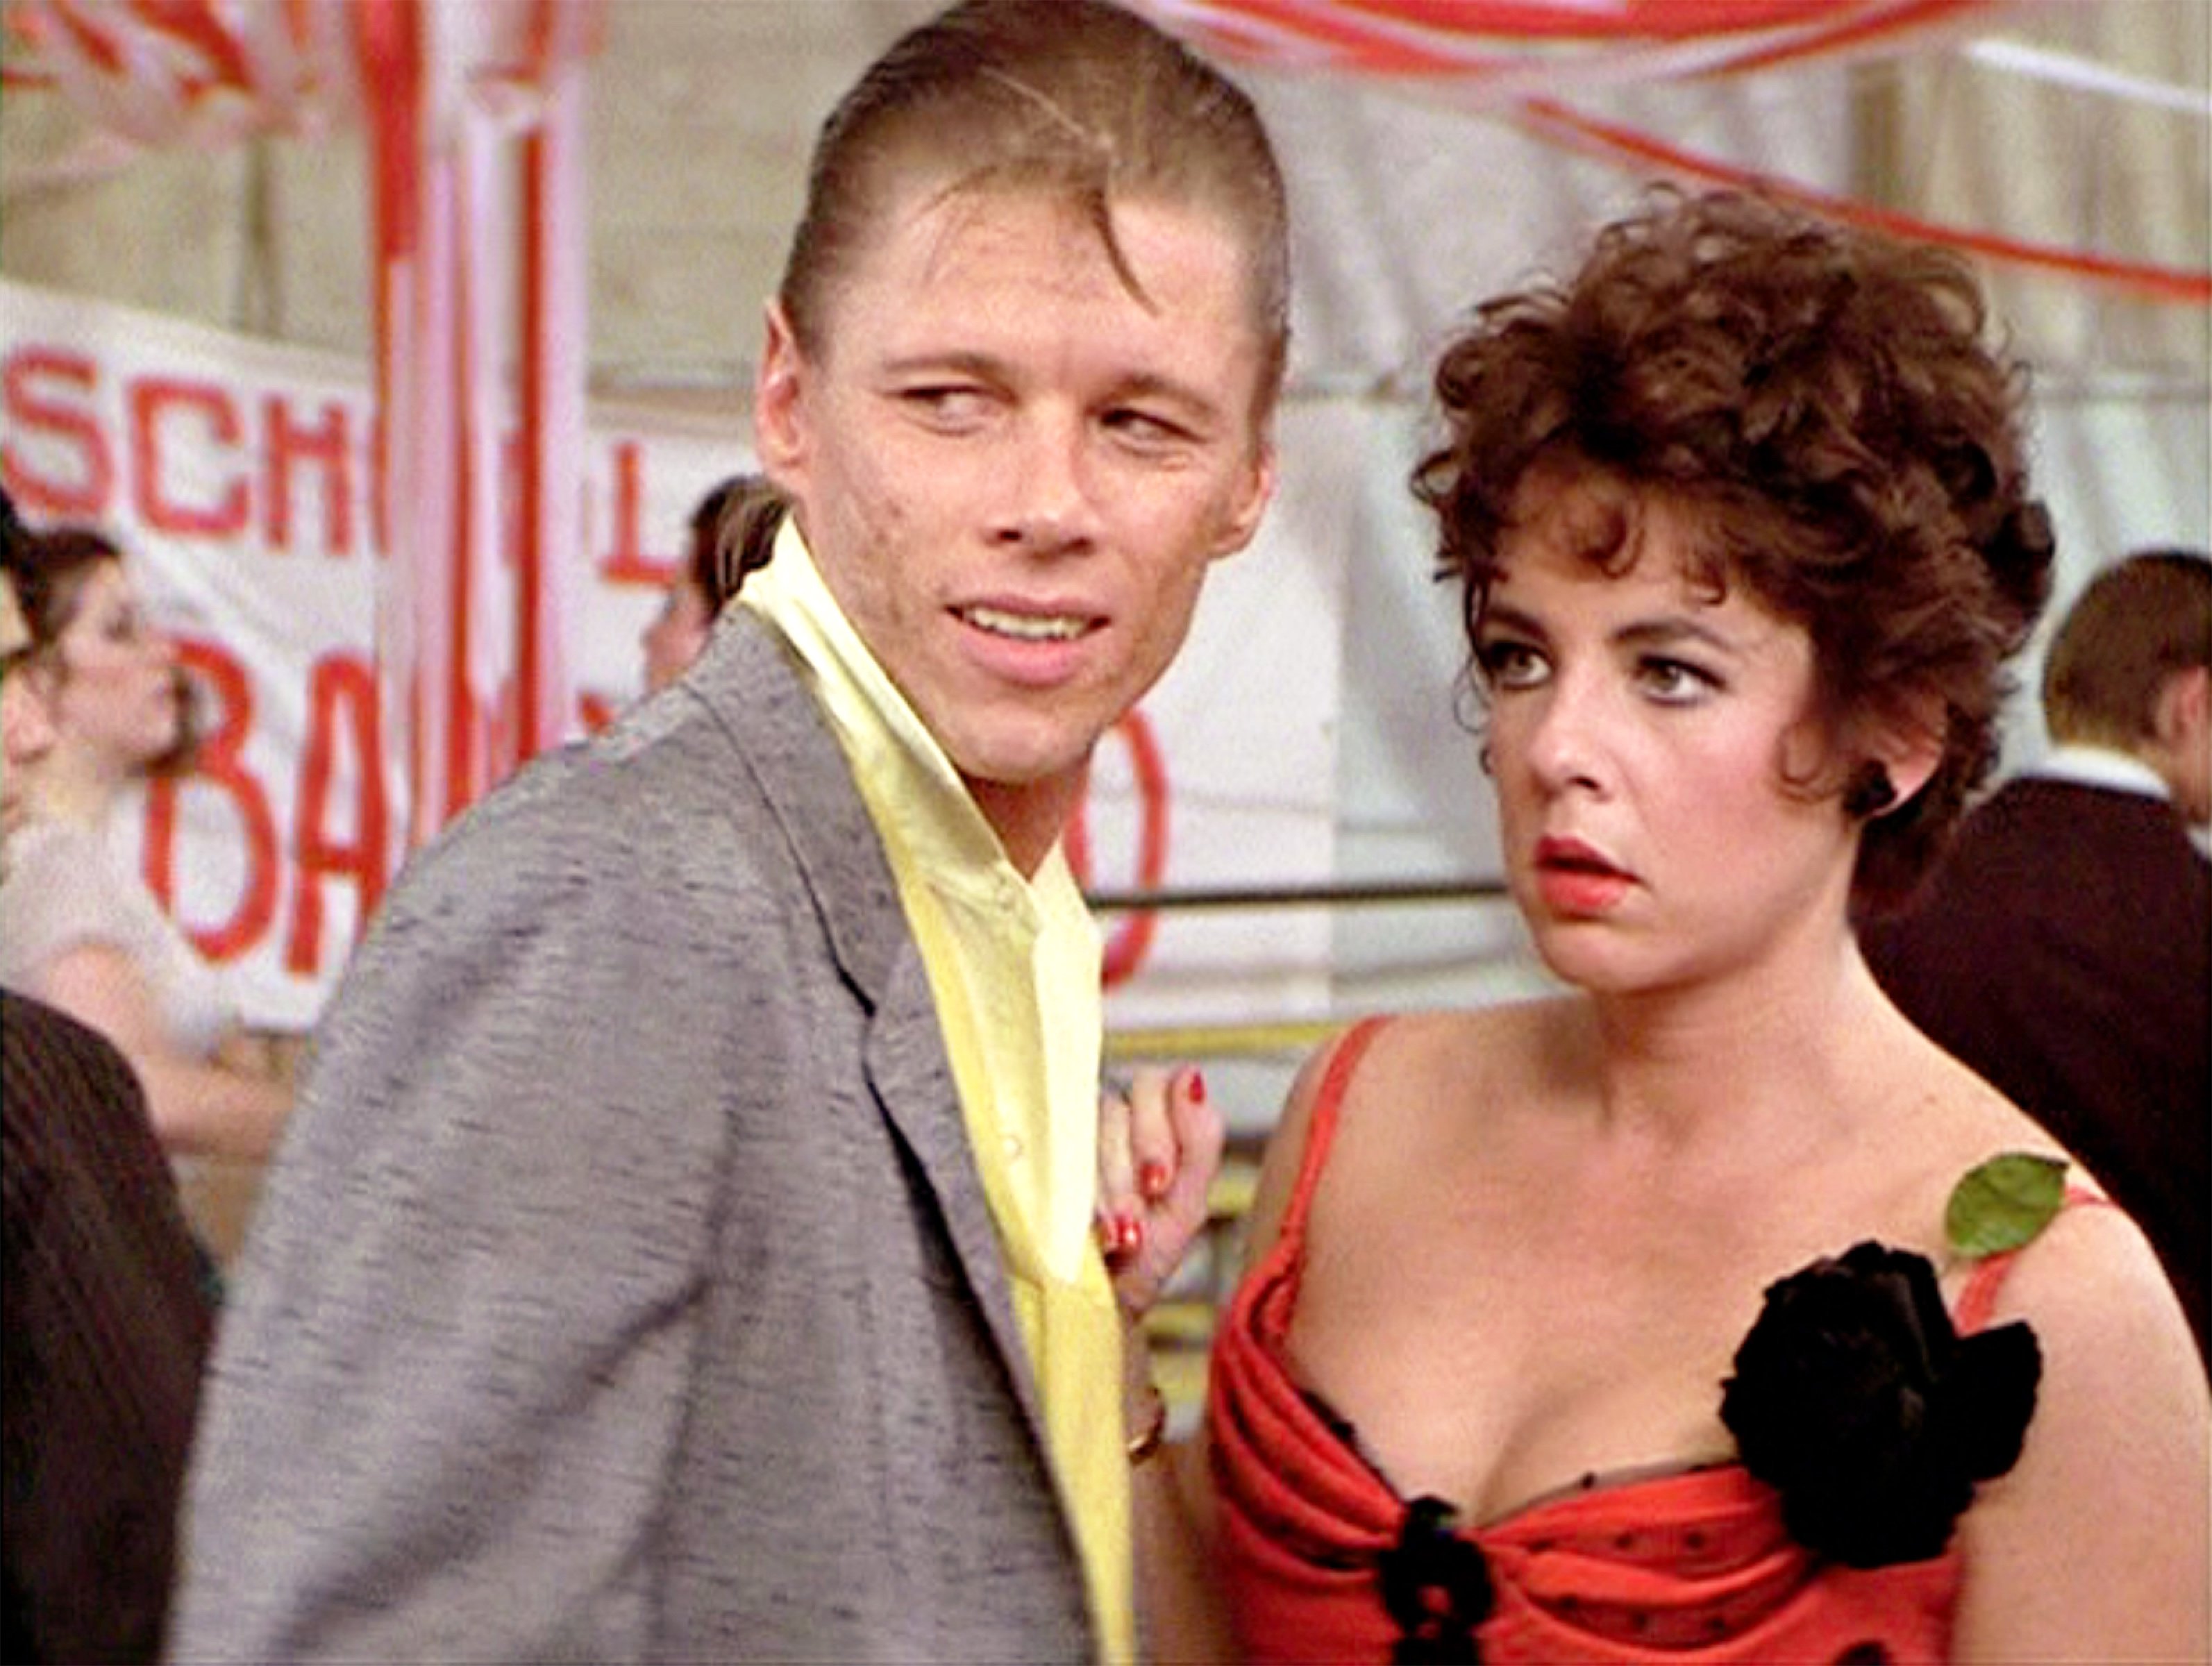 Dennis Stewart as Scorpions gang member Leo, and Stockard Channing as Rizzo on the set of 'Grease'